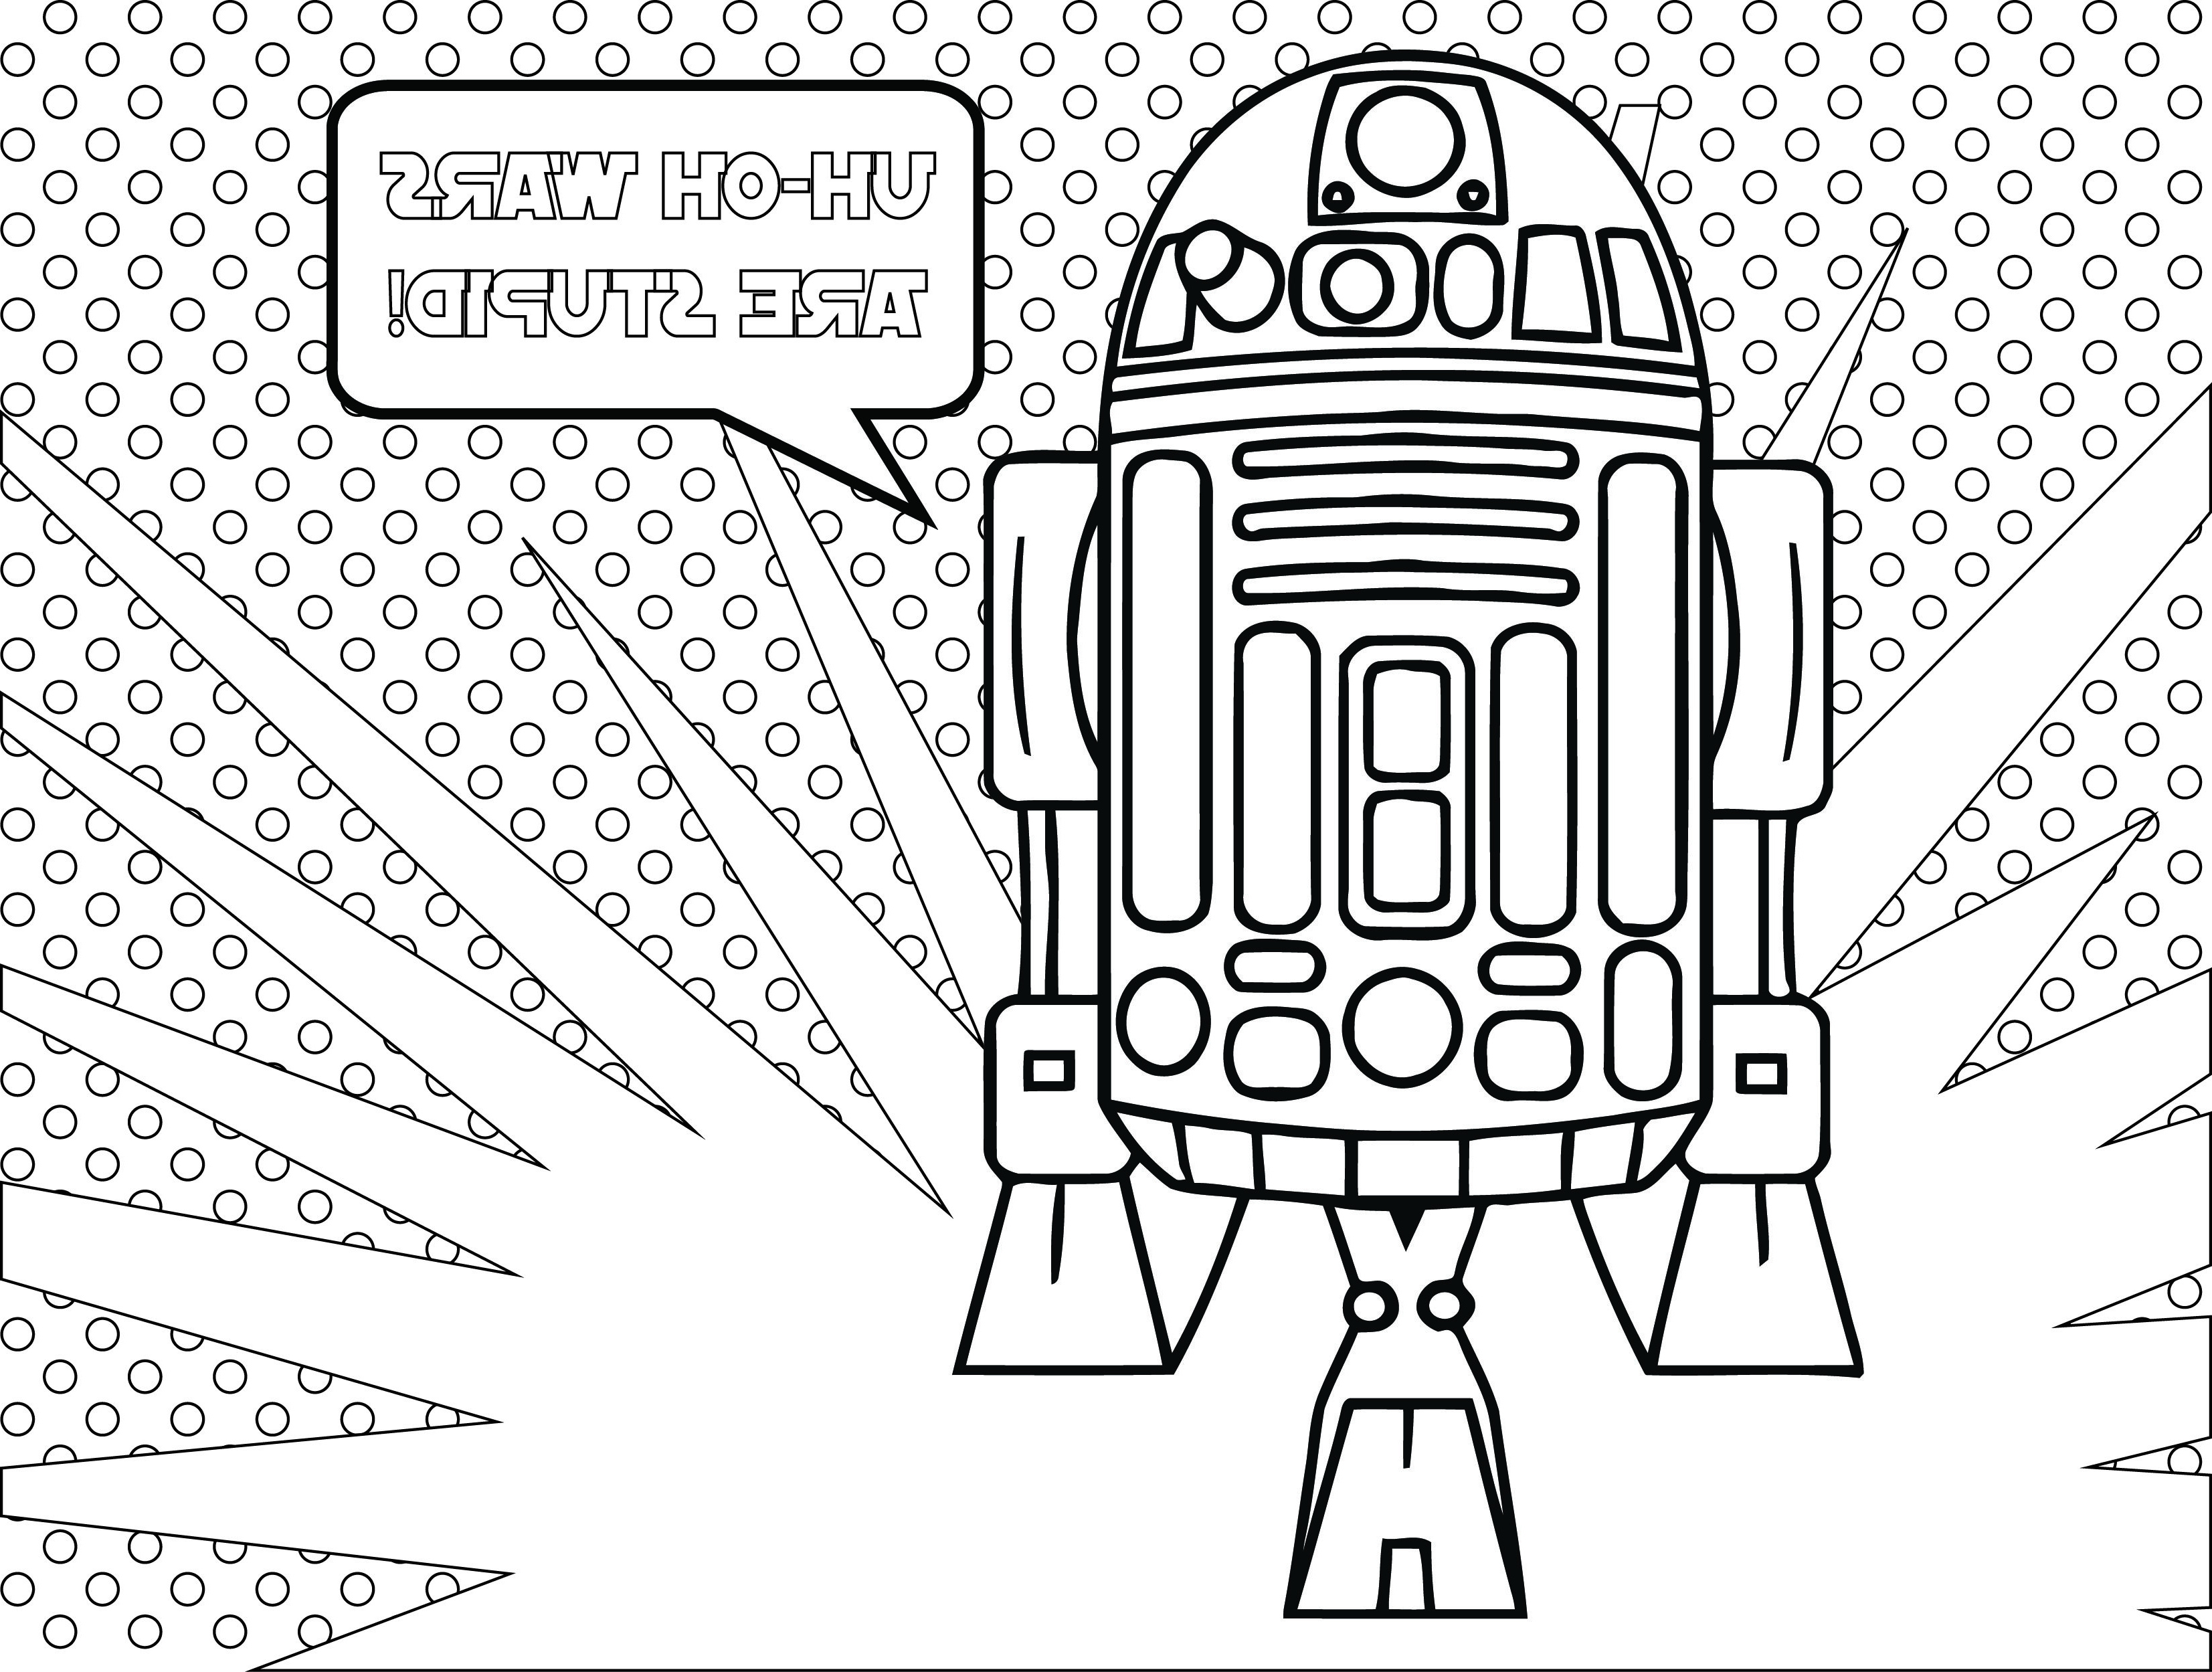 Dessin Stars Wars Impressionnant Photographie Star Wars Fall Of the Resistance‬ Coloriage R2d2